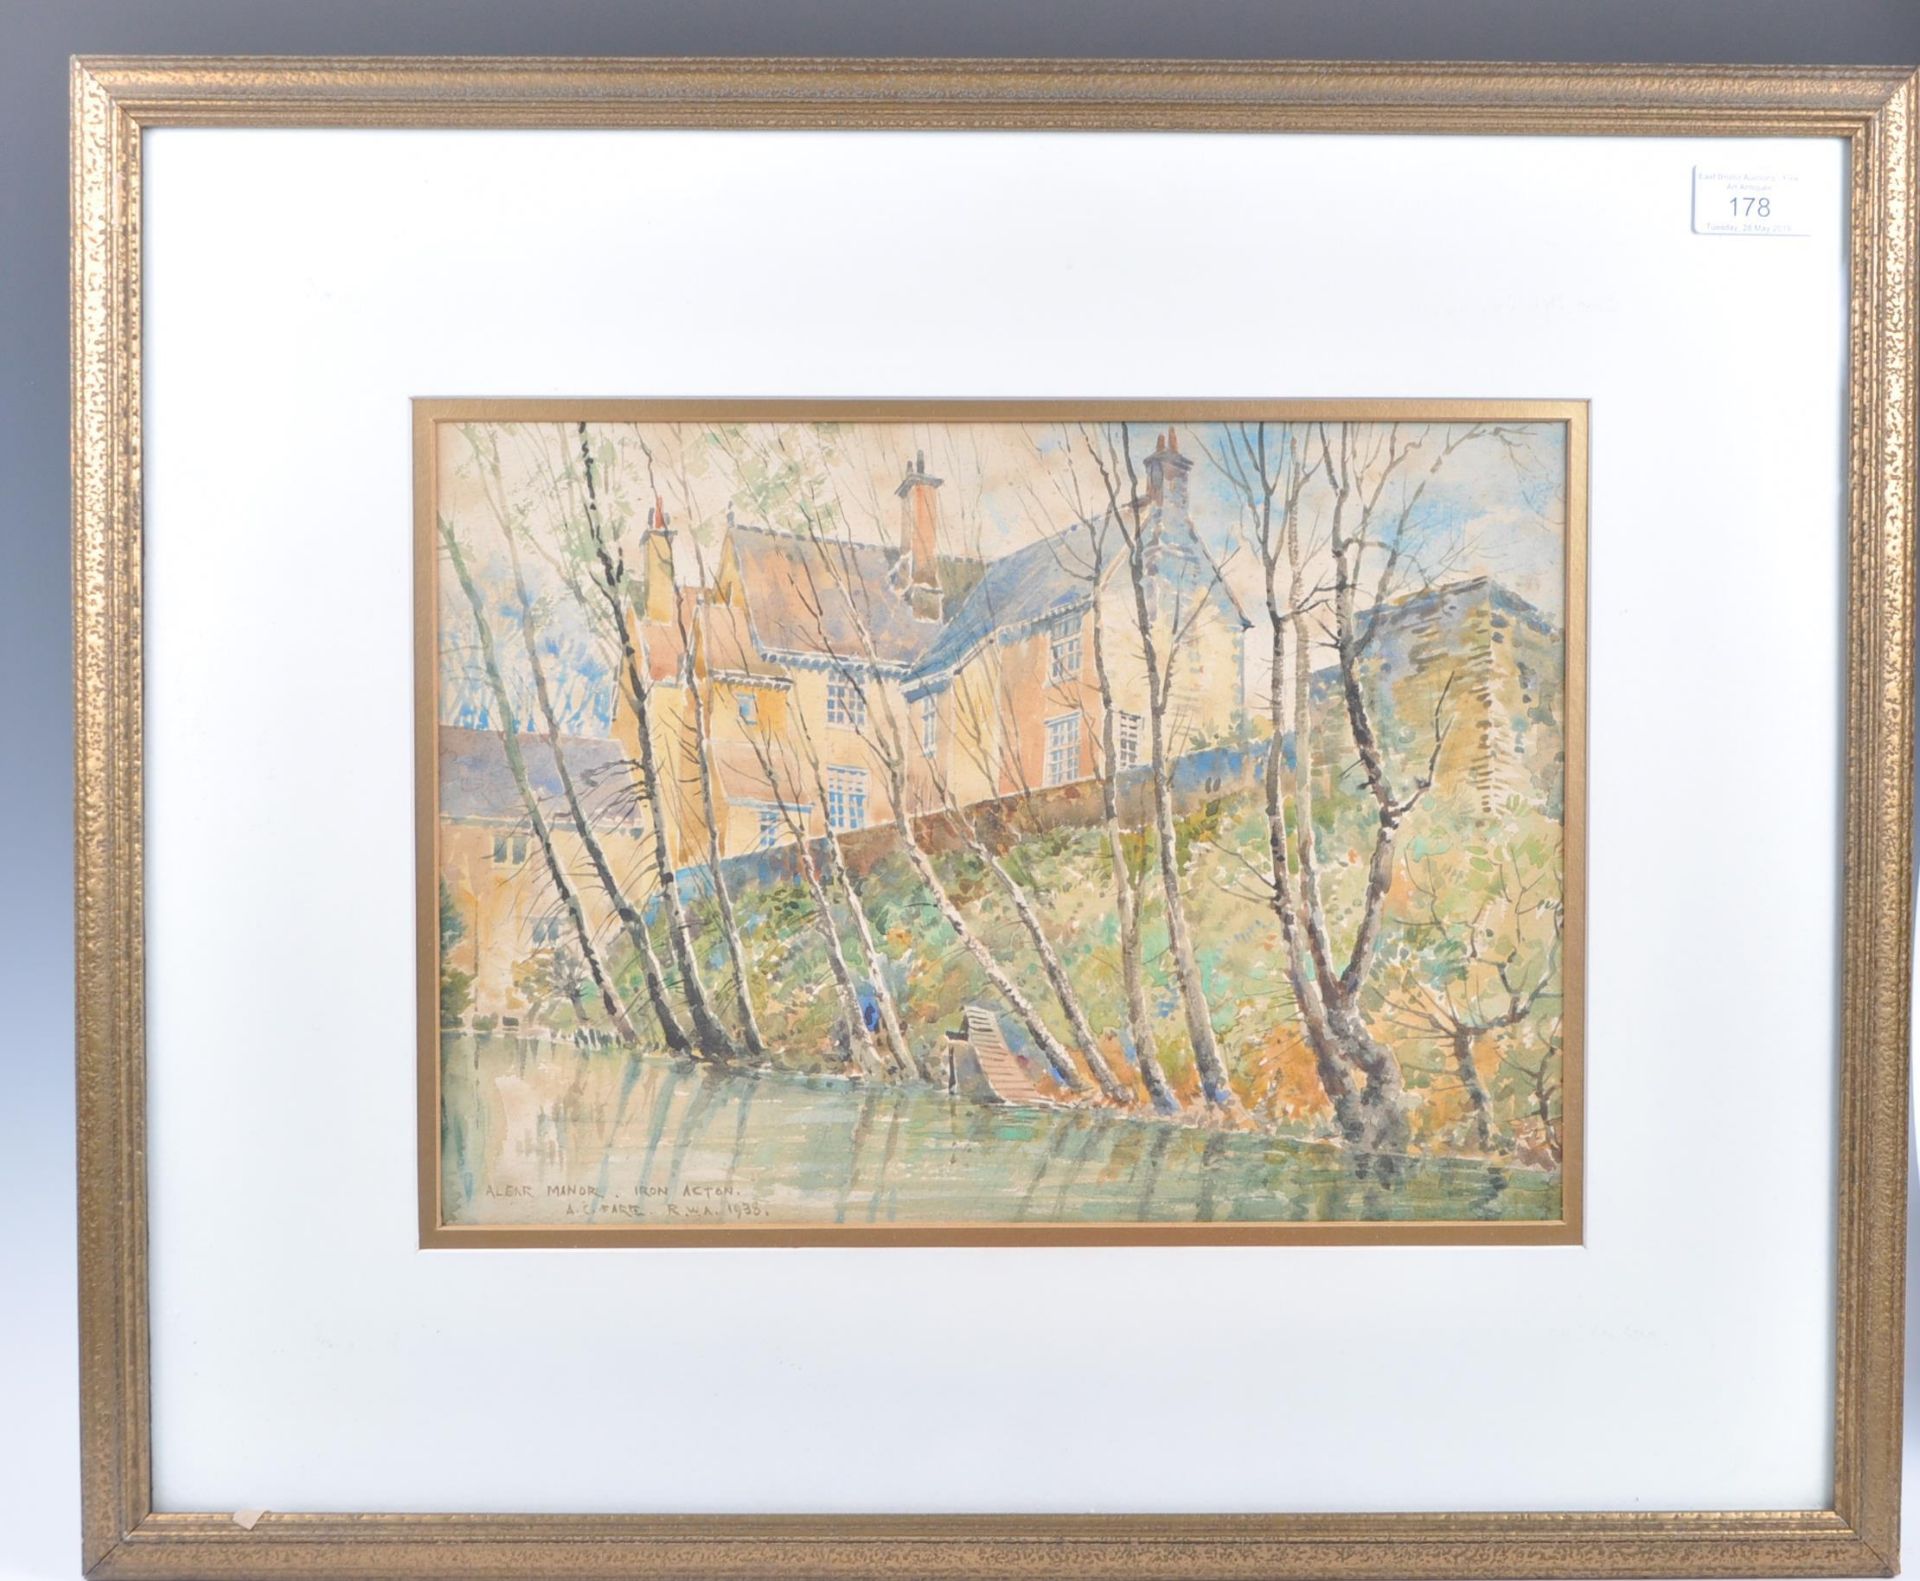 ARTHUR CHARLES FARE (1876-1958) WATERCOLOUR PAINTING IRON ACTON - Image 5 of 5